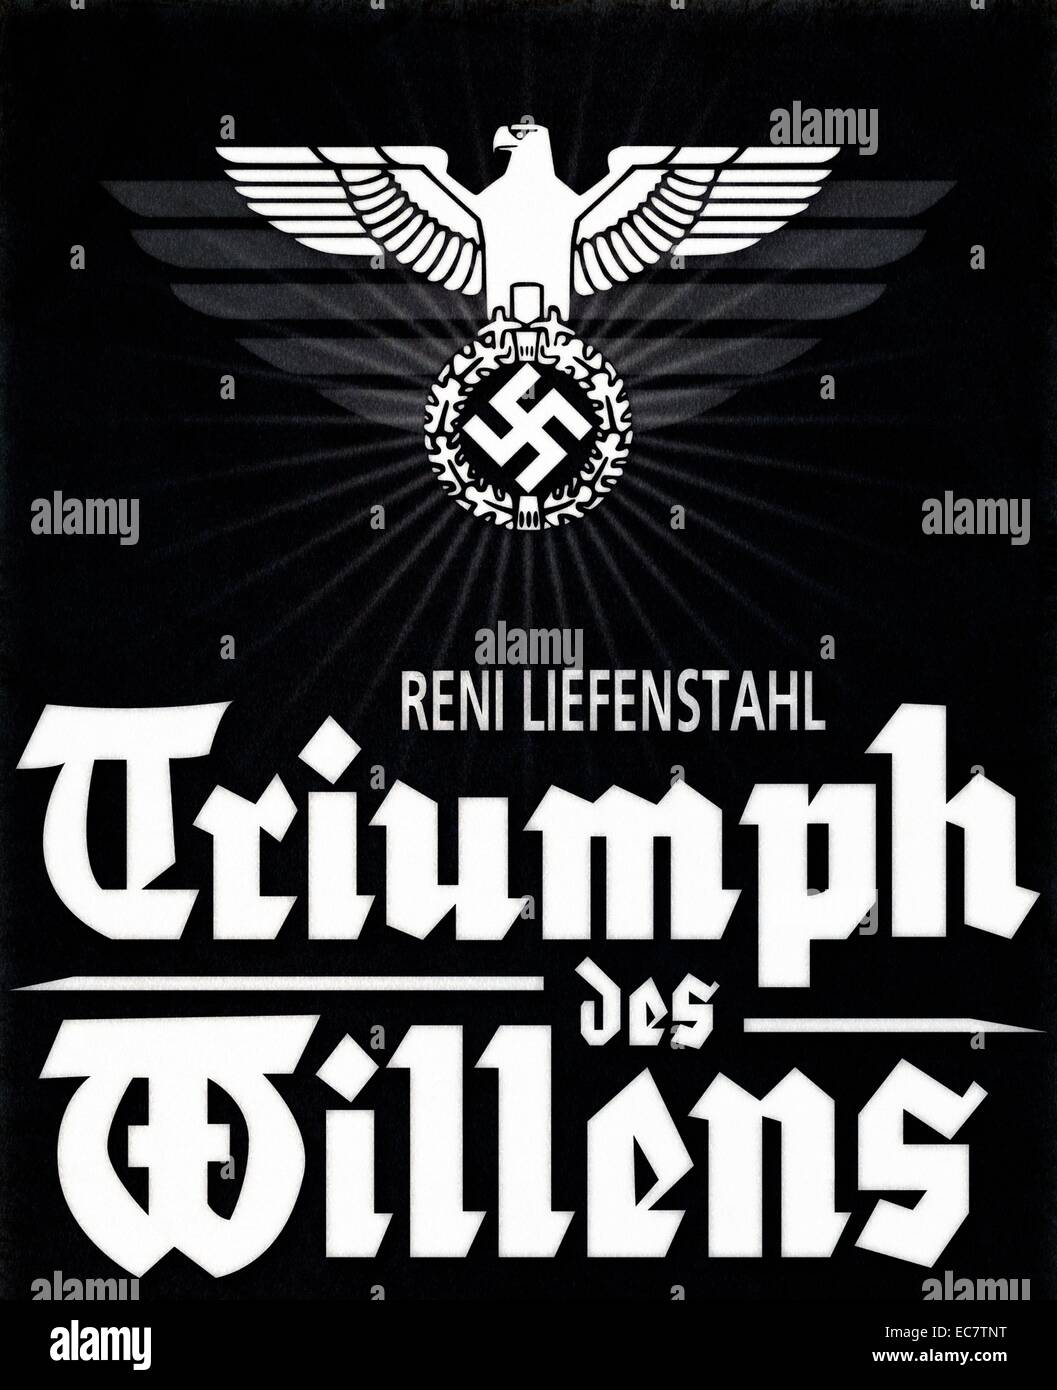 Triumph of the Will (Triumph des Willens) is a 1935 film made by Leni Riefenstahl. It chronicles the 1934 Nazi Party Congress in Nuremberg, which was attended by more than 700,000 Nazi supporters. The film contains excerpts from speeches given by Nazi leaders at the Congress, including portions of speeches by Adolf Hitler, Rudolf Hess, and Julius Streicher, interspersed with footage of massed Sturmabteilung and Schutzstaffel troops, and public reaction. Stock Photo